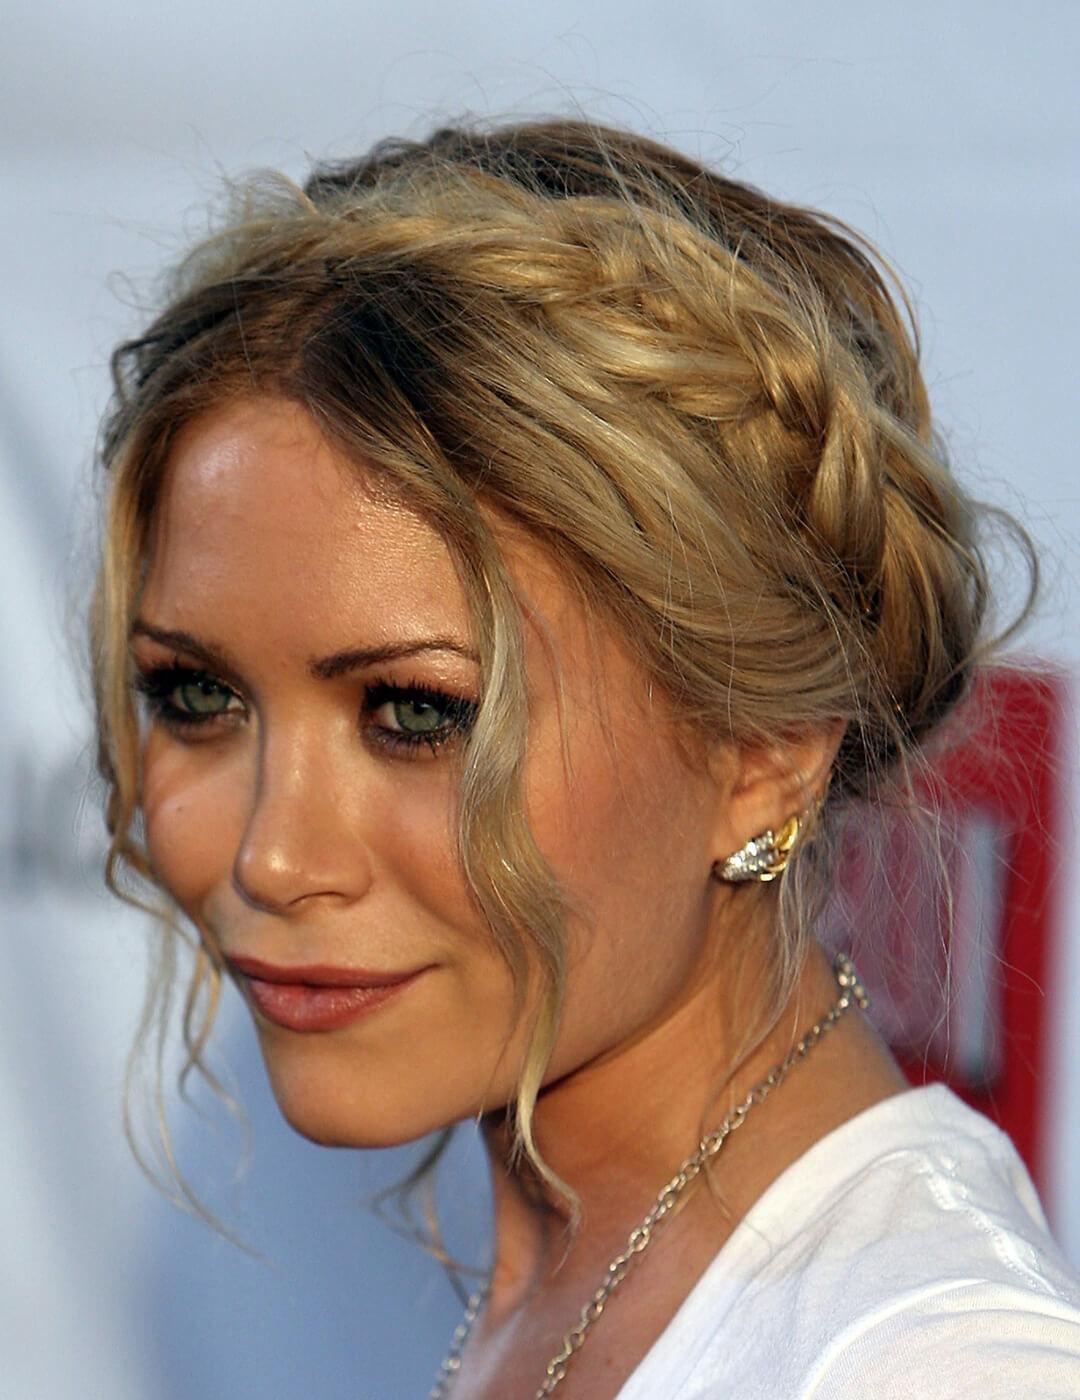 A photo of Mary-Kate Olsen with braided bangs wearing a white shirt and a necklace